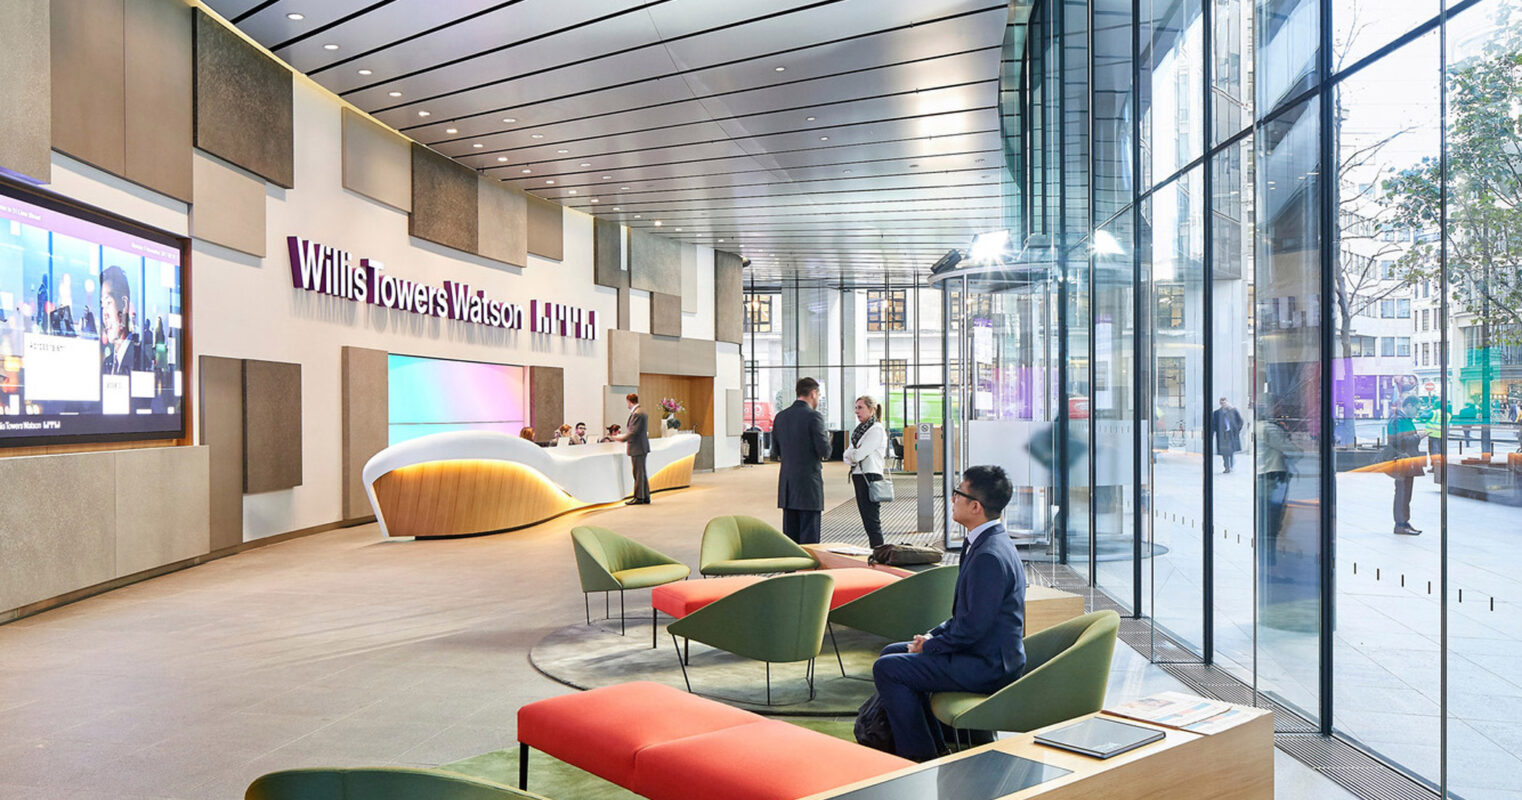 Modern corporate lobby featuring a curved reception desk, sleek glass walls, and an array of colorful seating options set on a polished concrete floor, accentuated by natural light and digital display screens.